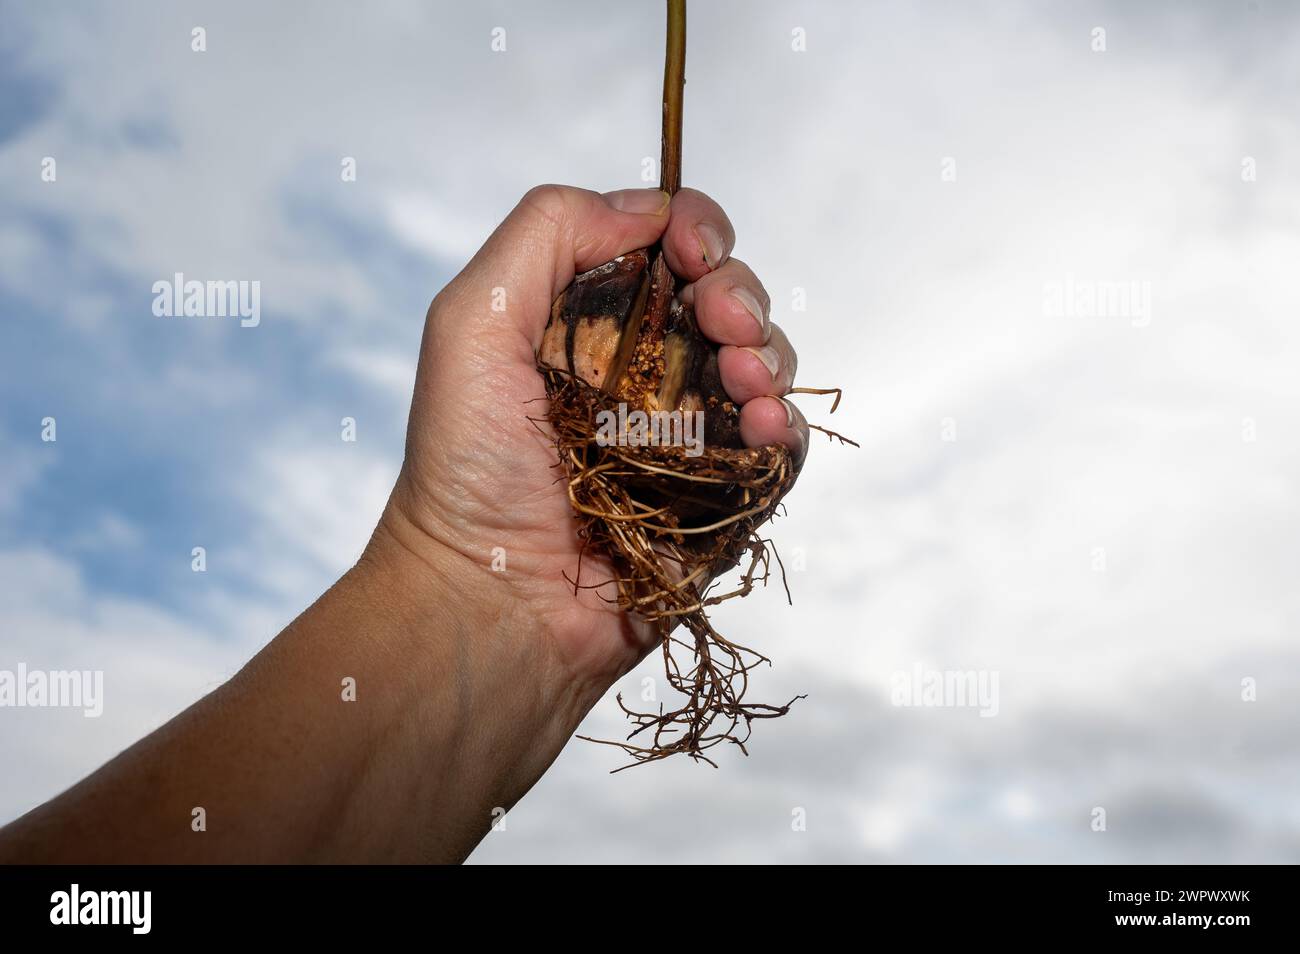 A human hand holds an avocado (Persea americana) pit with roots against an overcast sky Stock Photo